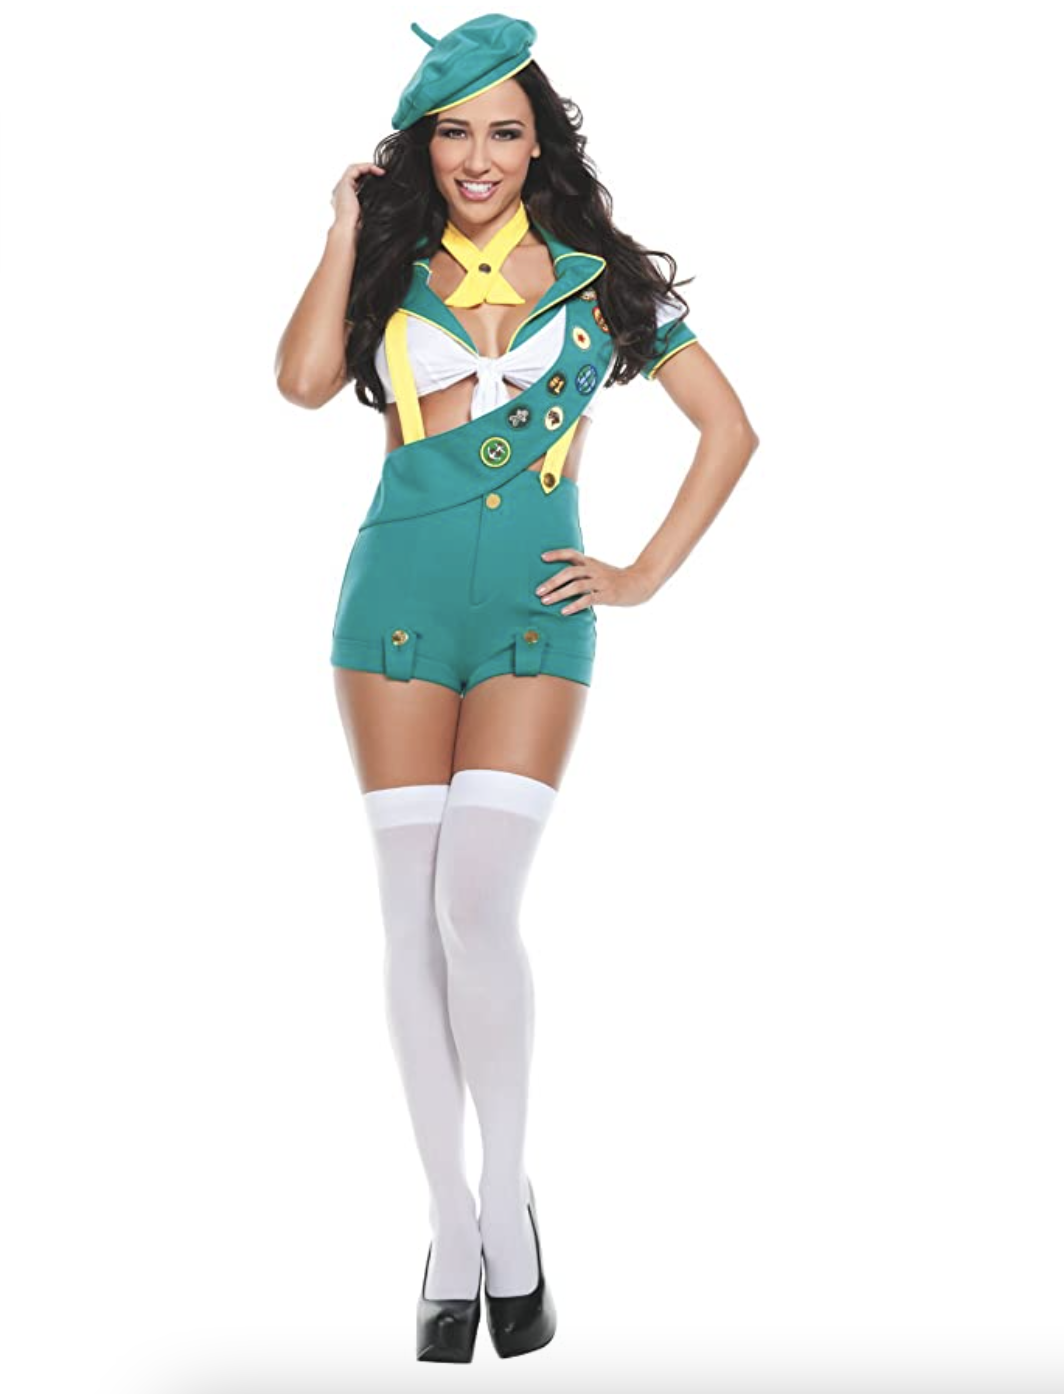 A woman dressed up in a skimpy Girl Scout costume